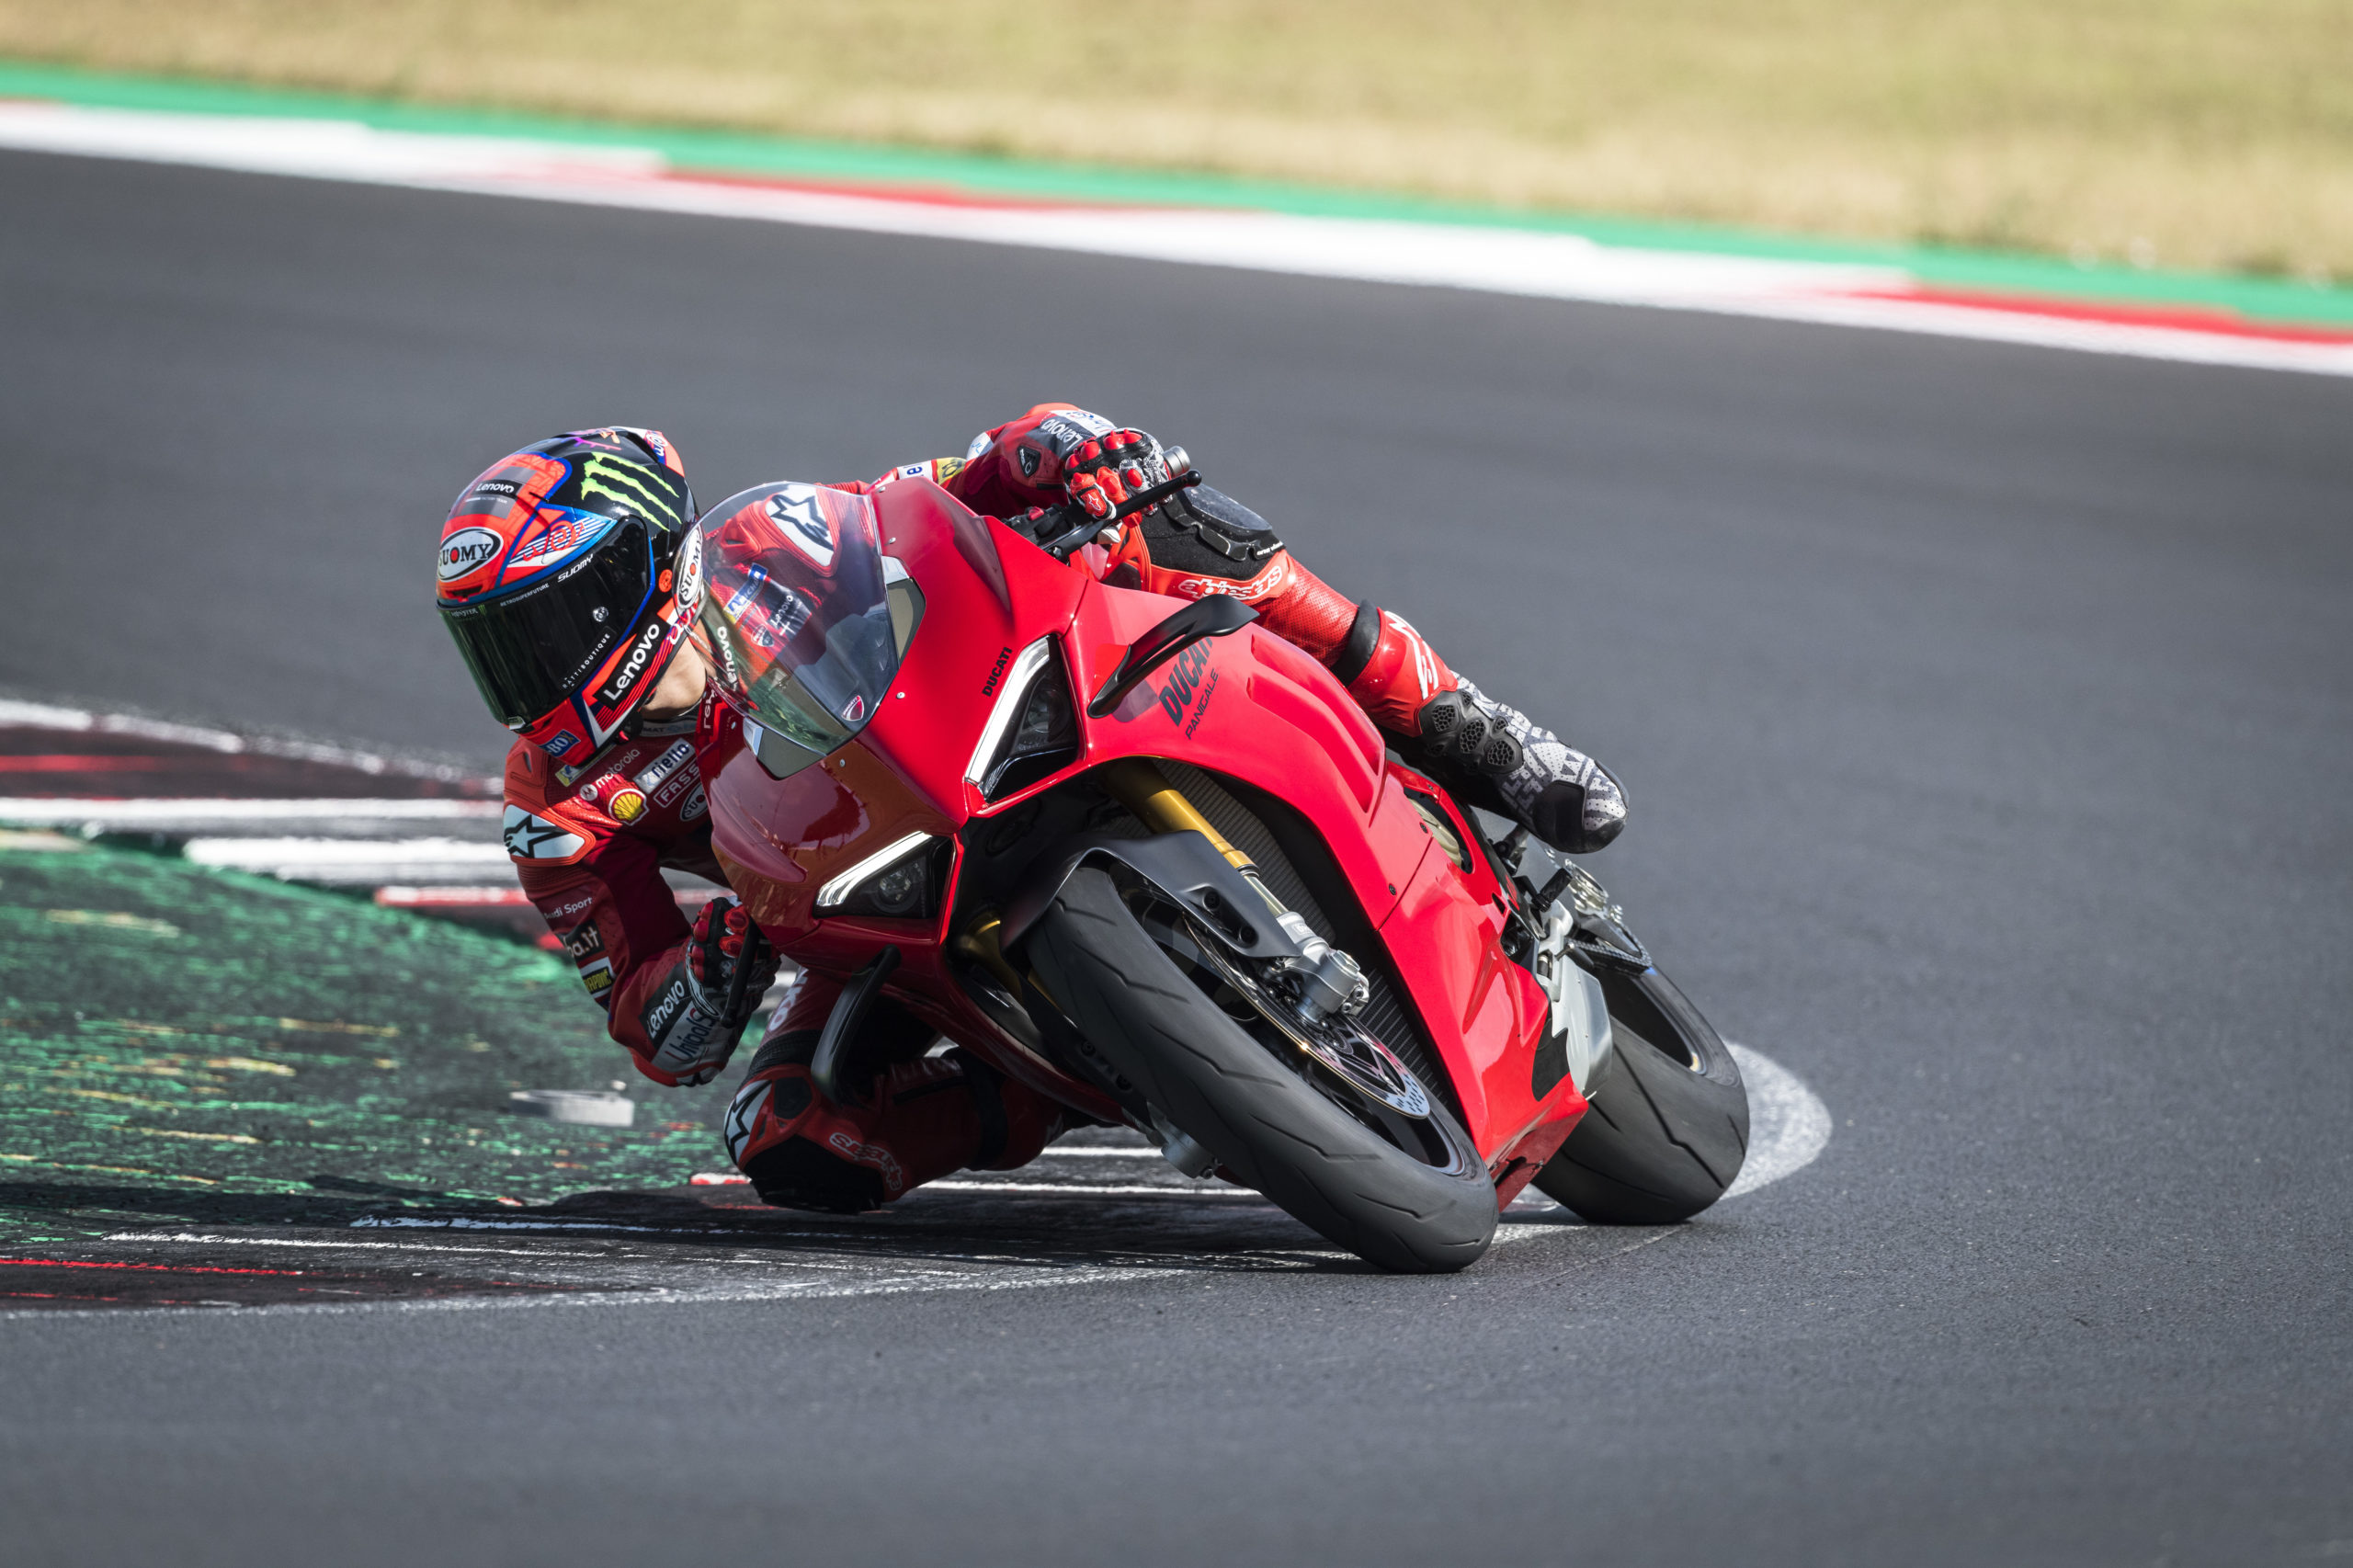 Ducati's new 2022 Panigale V4 and V4 S: A racer on a track with the Panigale with focus on the ergonomics